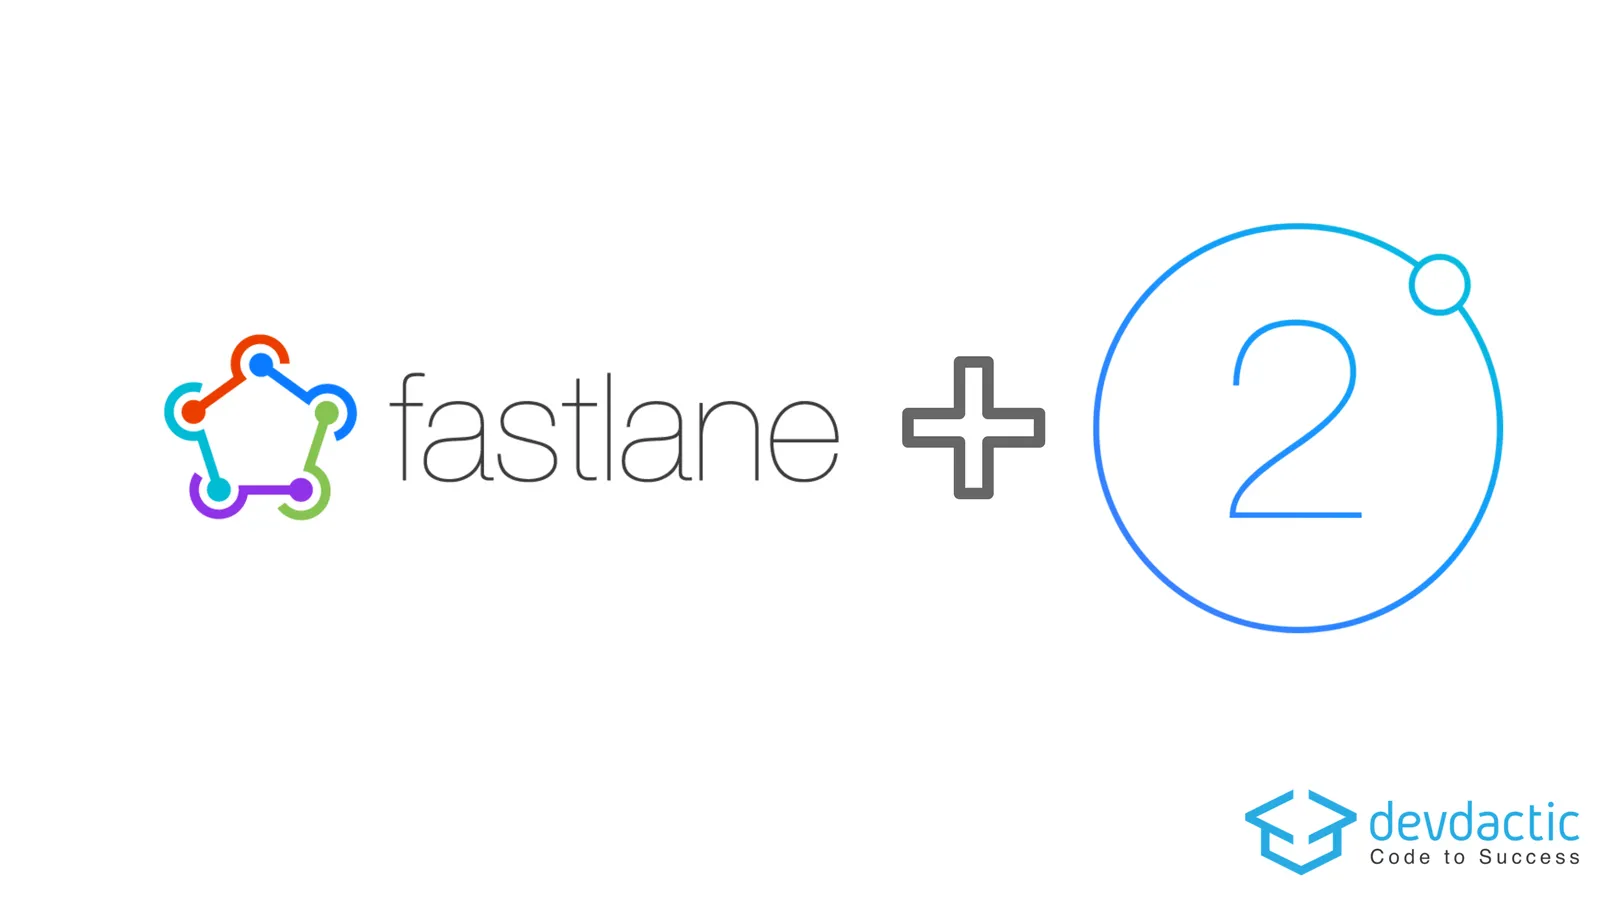 Automatic Ionic 2 Builds For iOS Using Fastlane